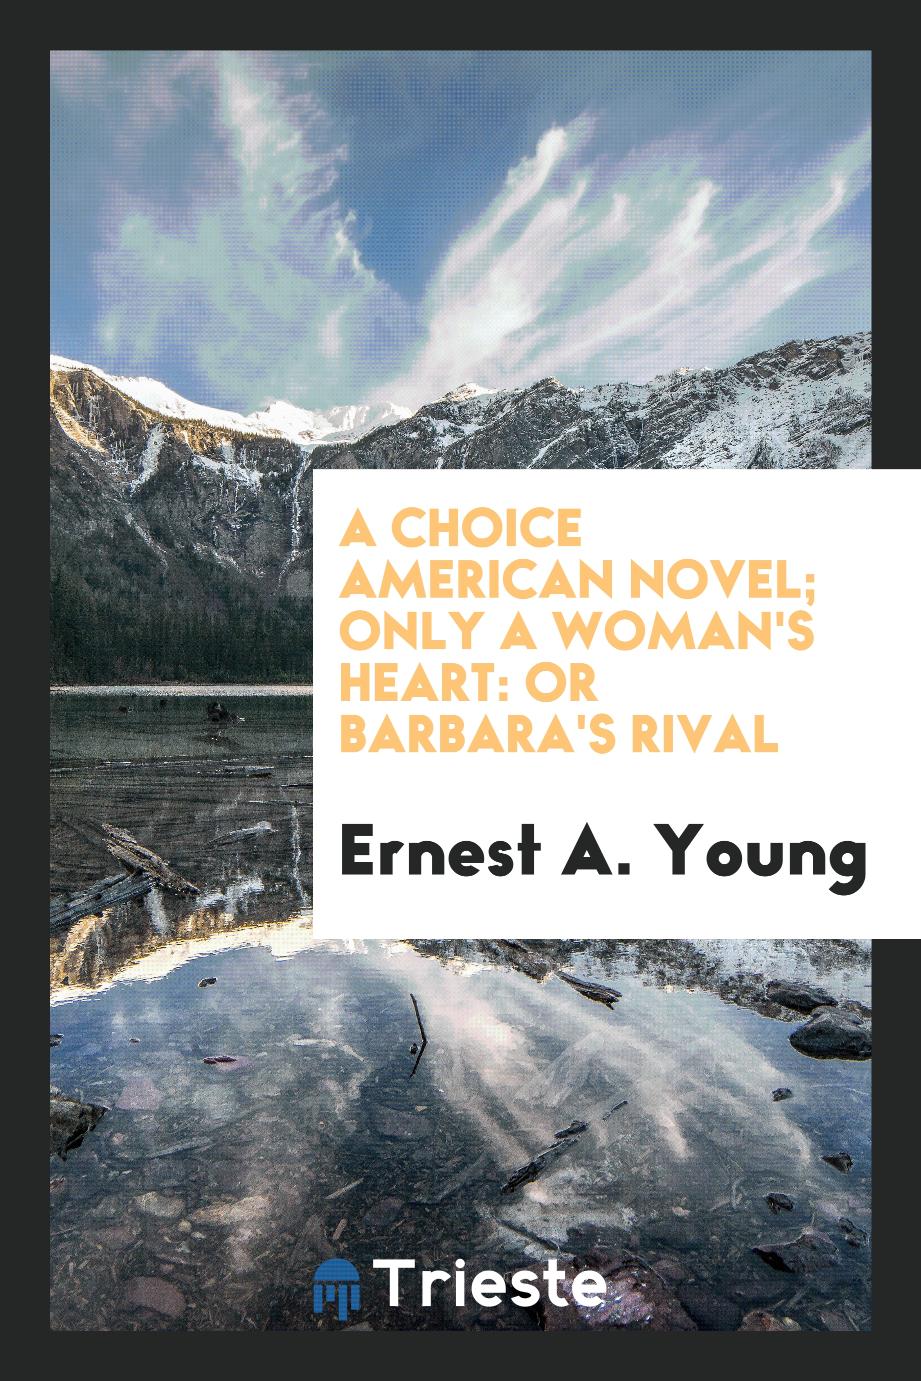 A Choice American Novel; Only a Woman's Heart: Or Barbara's Rival